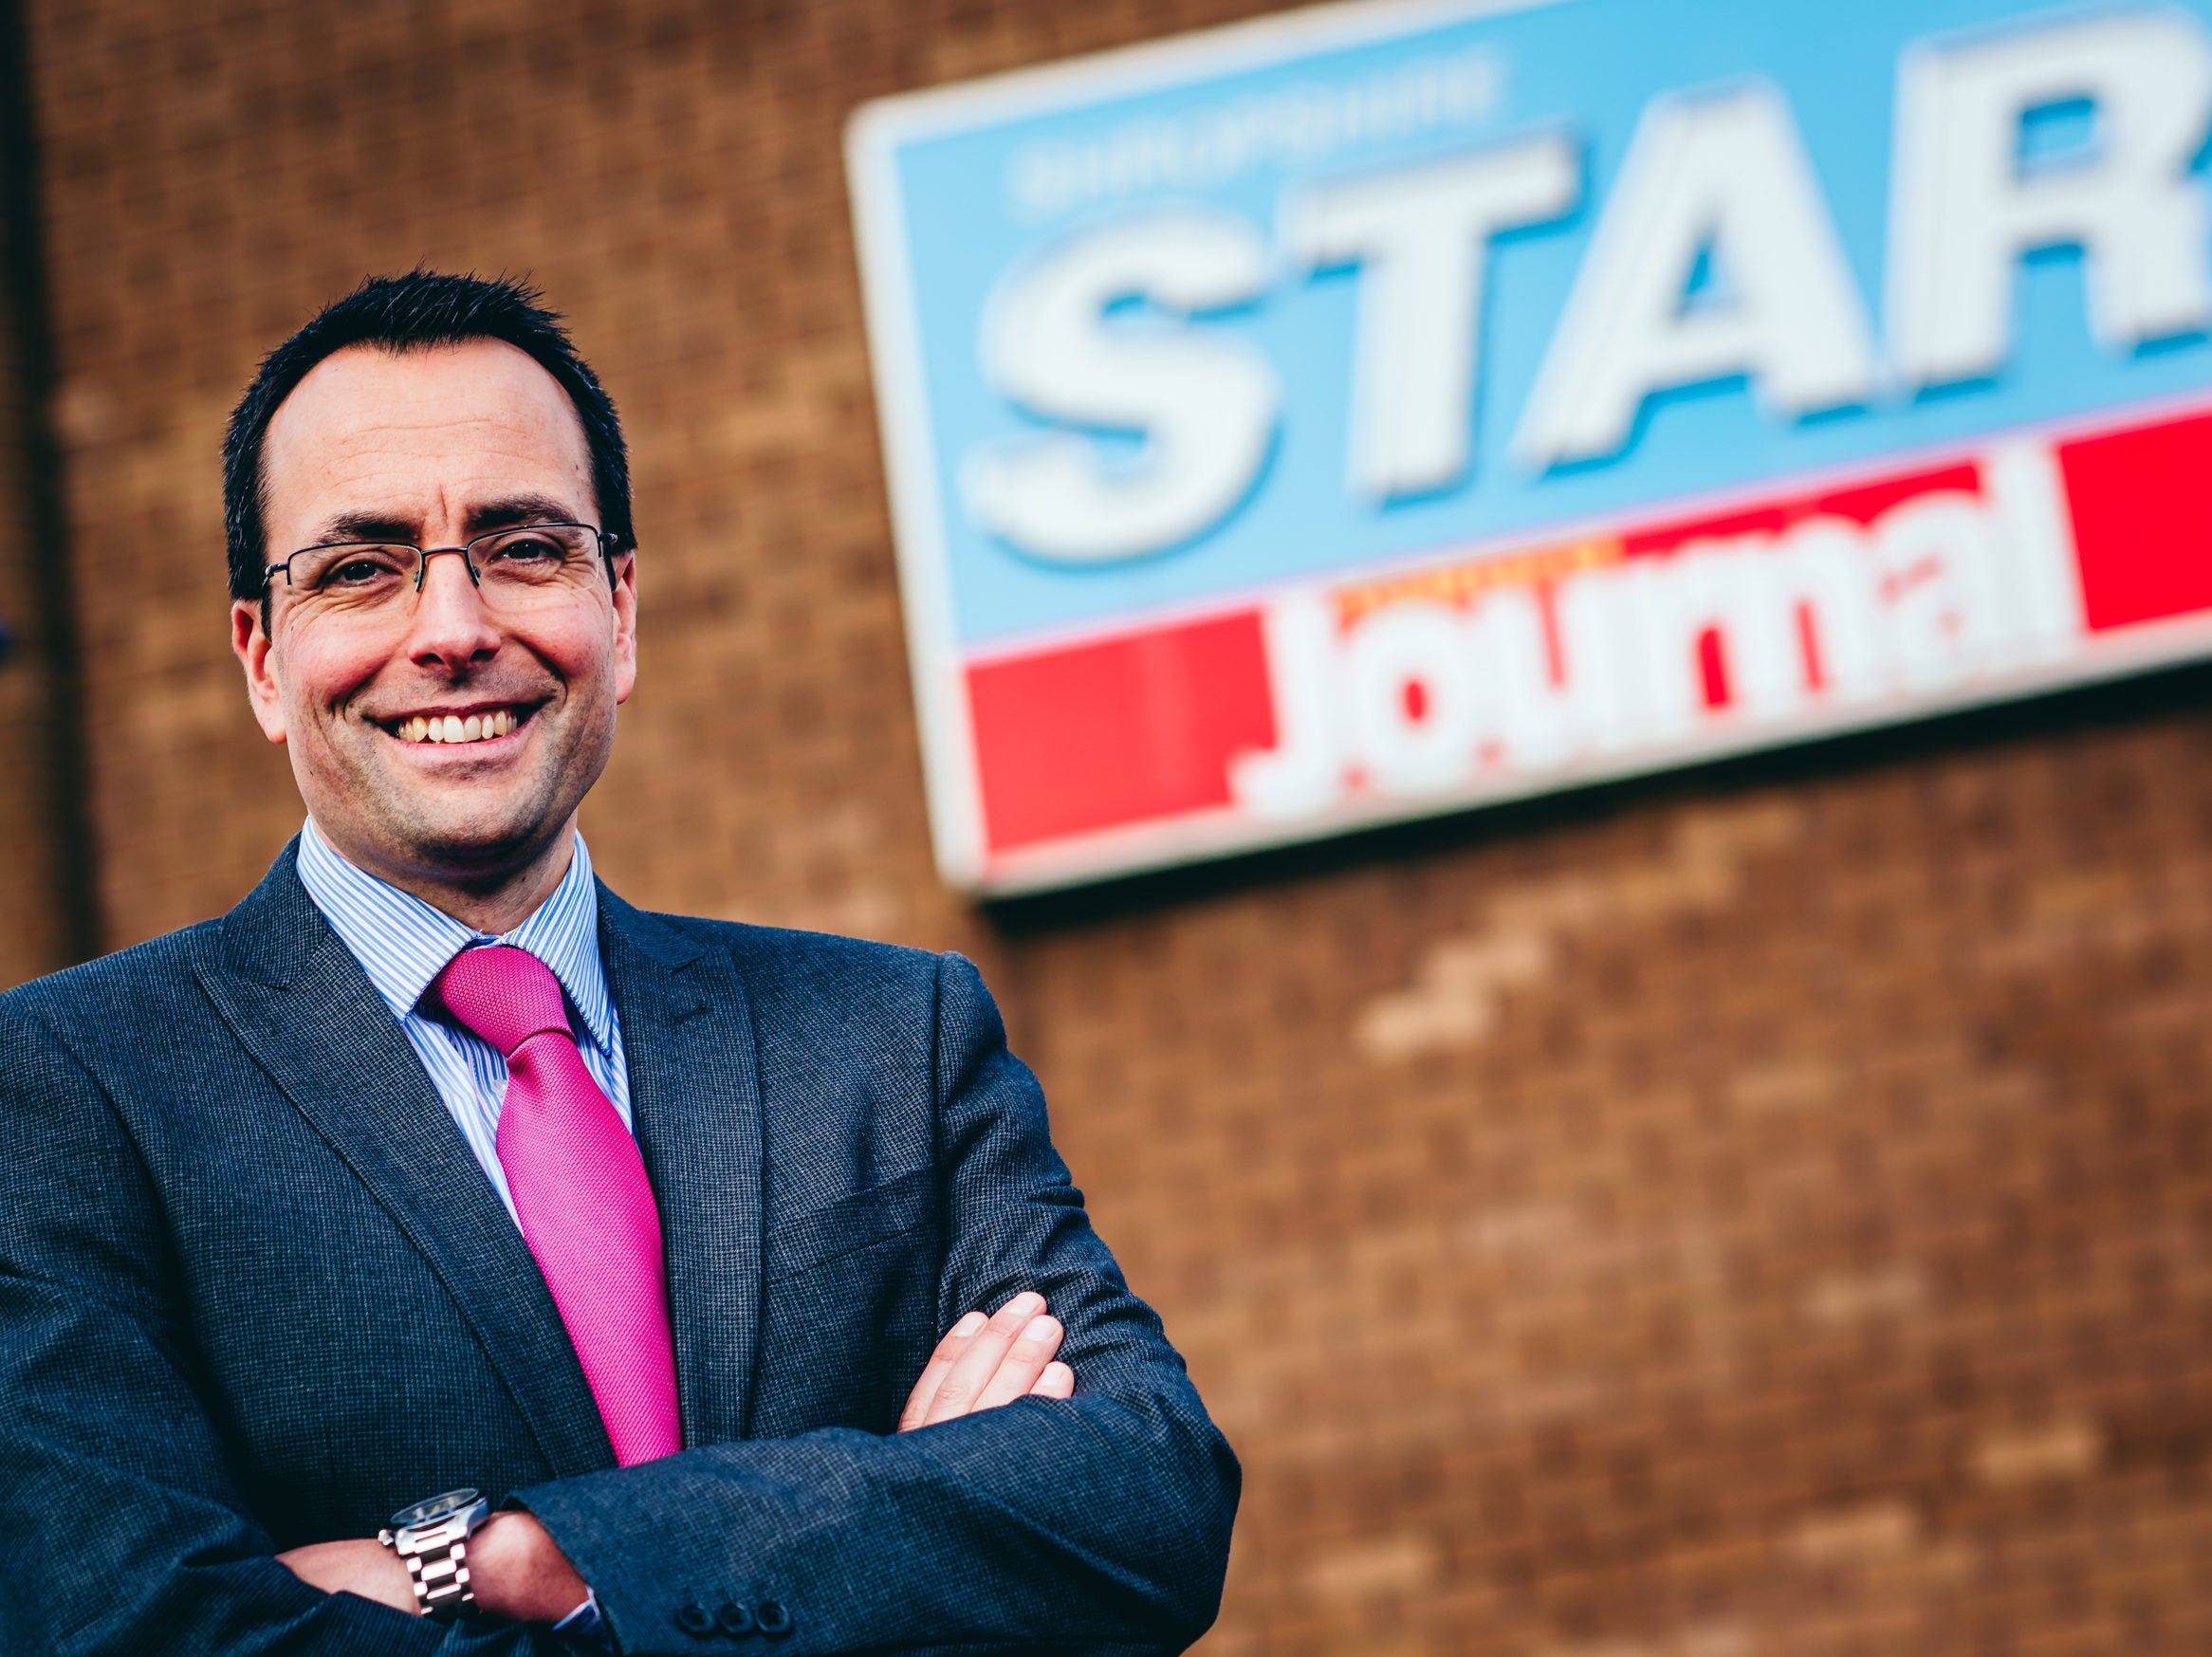 Martin Wright to head up Express & Star and Shropshire Star in new role as editor-in-chief of Midland News Association